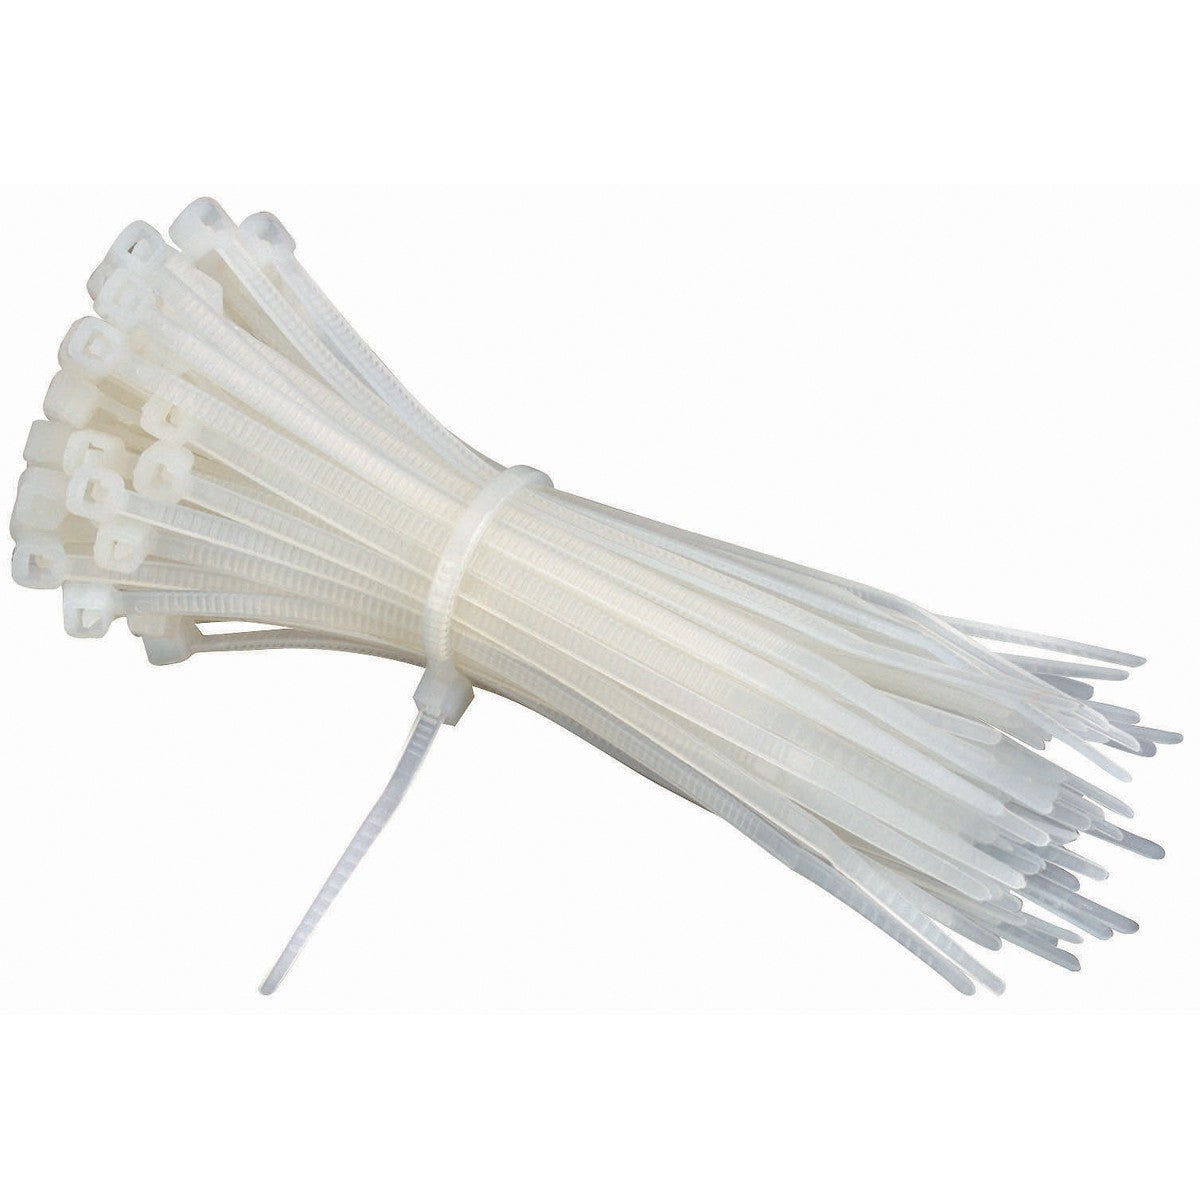 4.6 x 200mm - The Cable Tie Factory